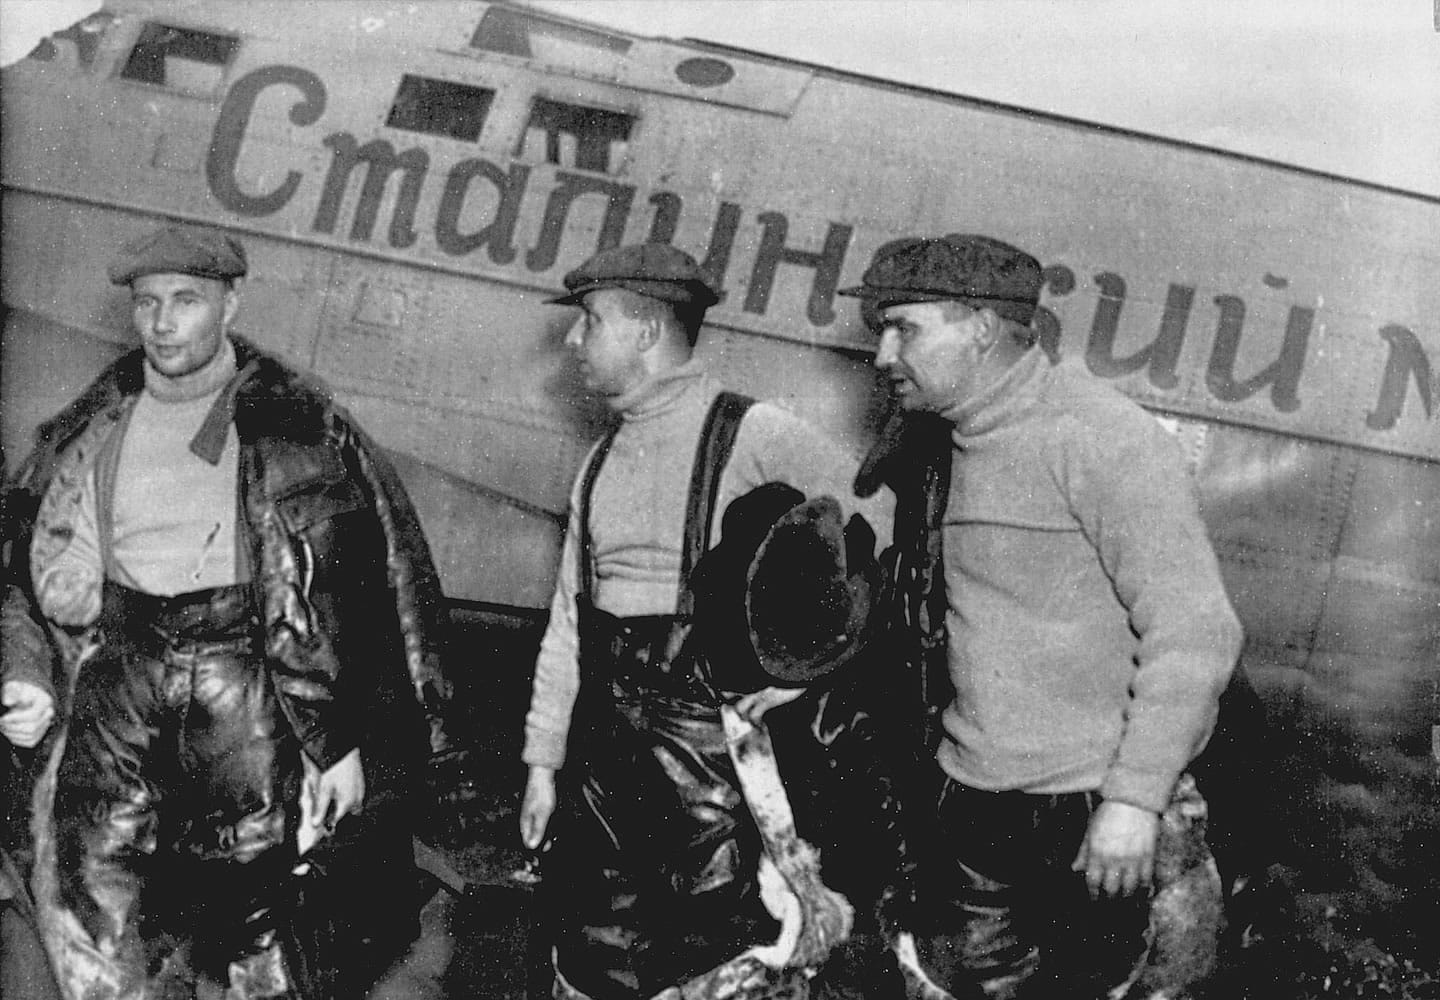 Navigator Alexander Belyakov, from left, co-pilot Georgy Baidukov and pilot Valery Chkalov stand by their plane on June 20, 1937, after completing a record-setting flight in Vancouver.